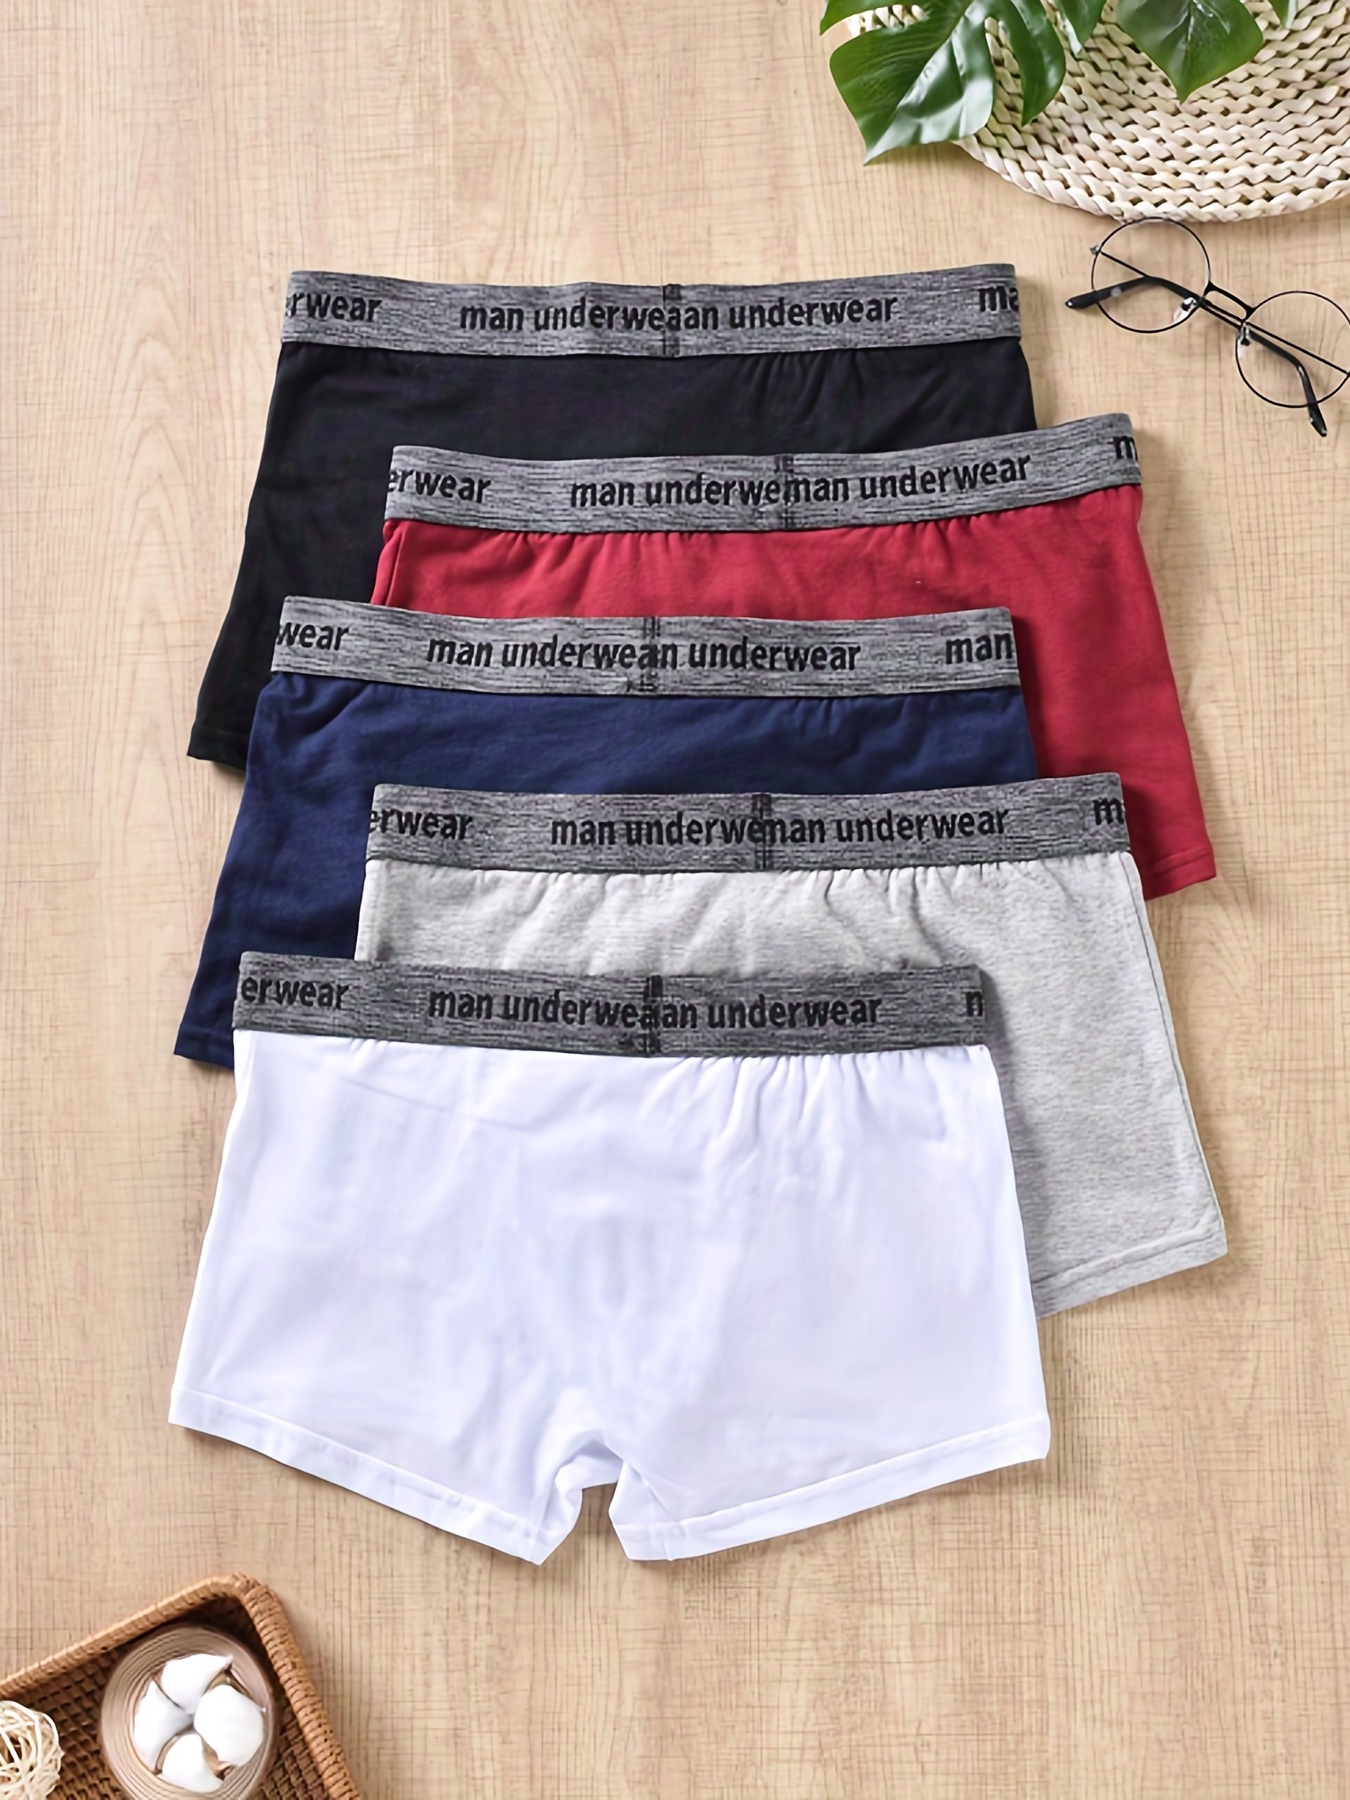 Cotton Briefs for Men - Comfortable and Breathable Underwear